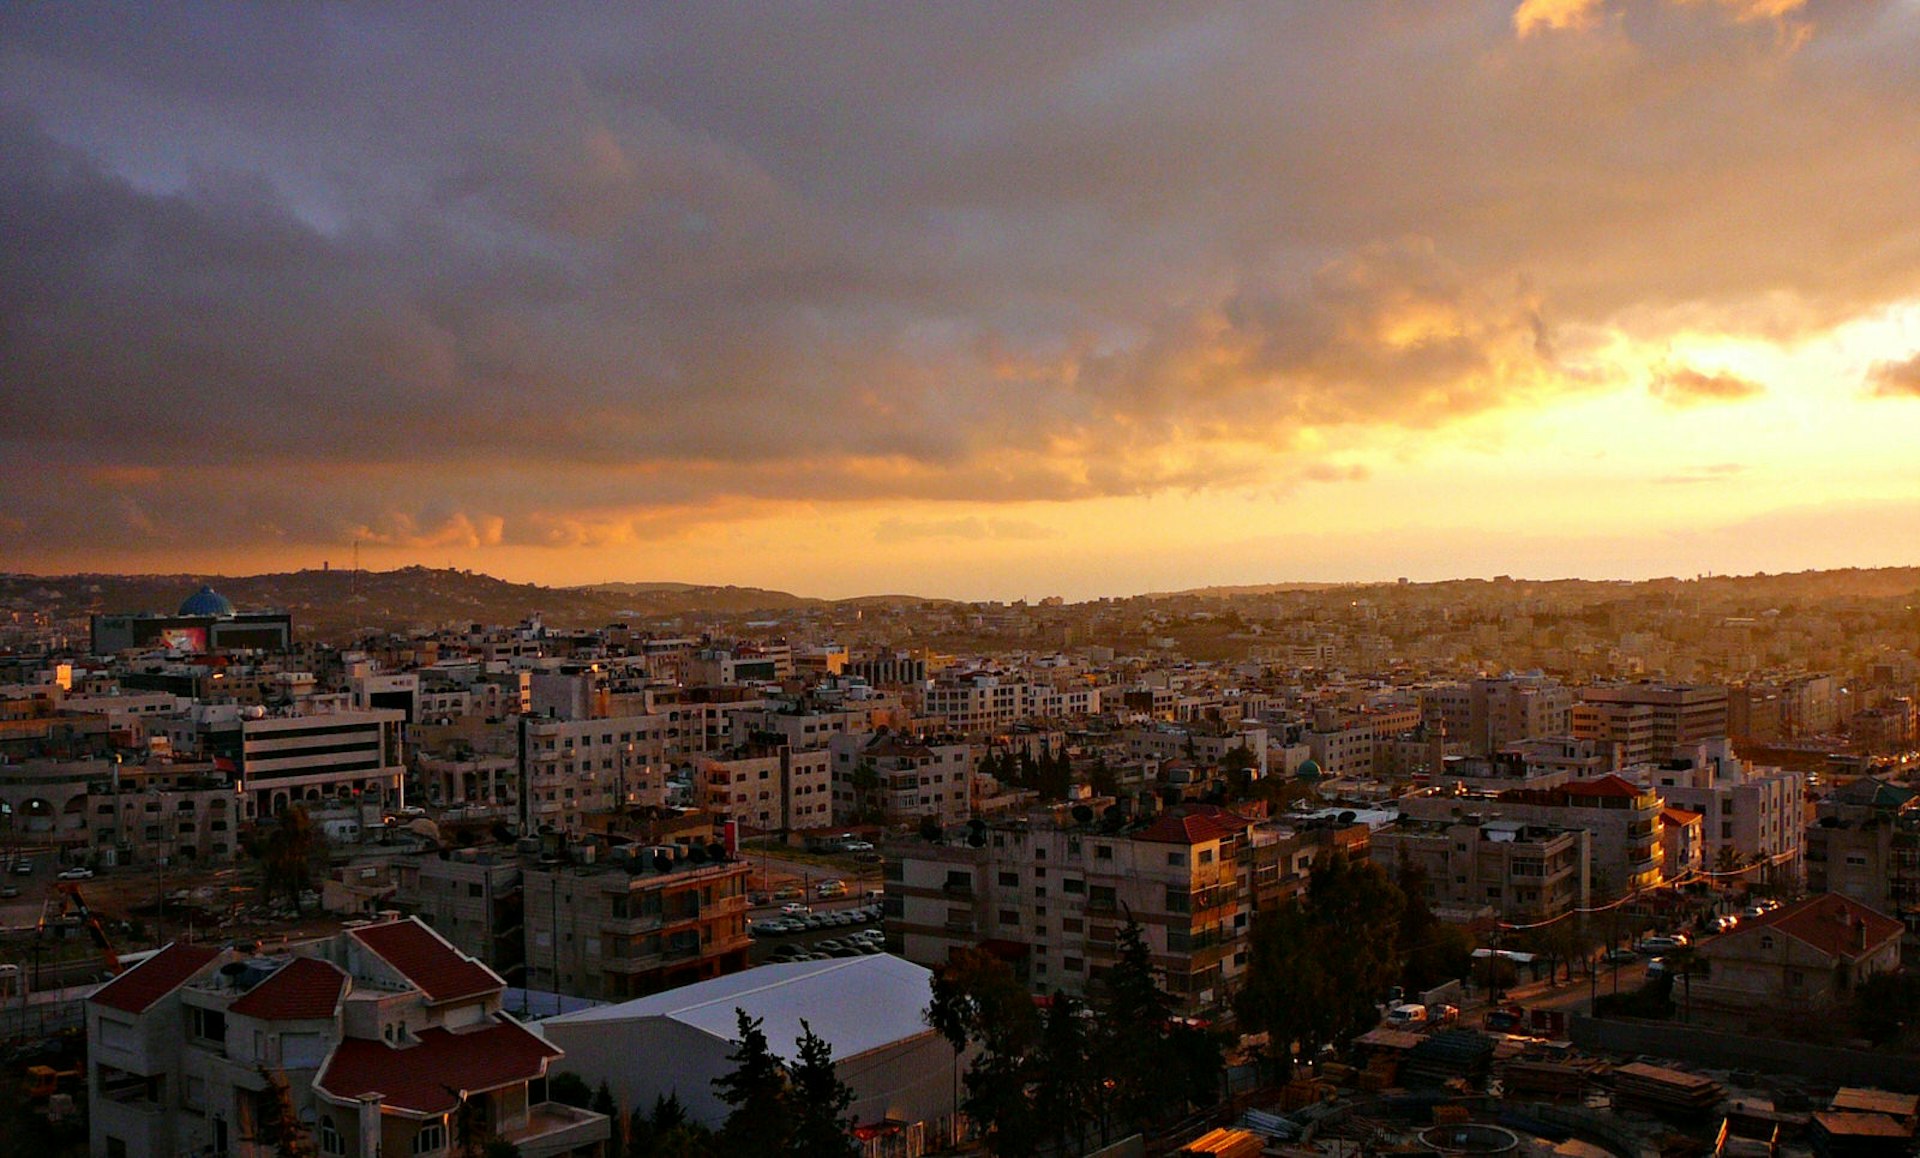 Sunset in Amman, Jordan. Image by Gregory T. Smith / Getty Images